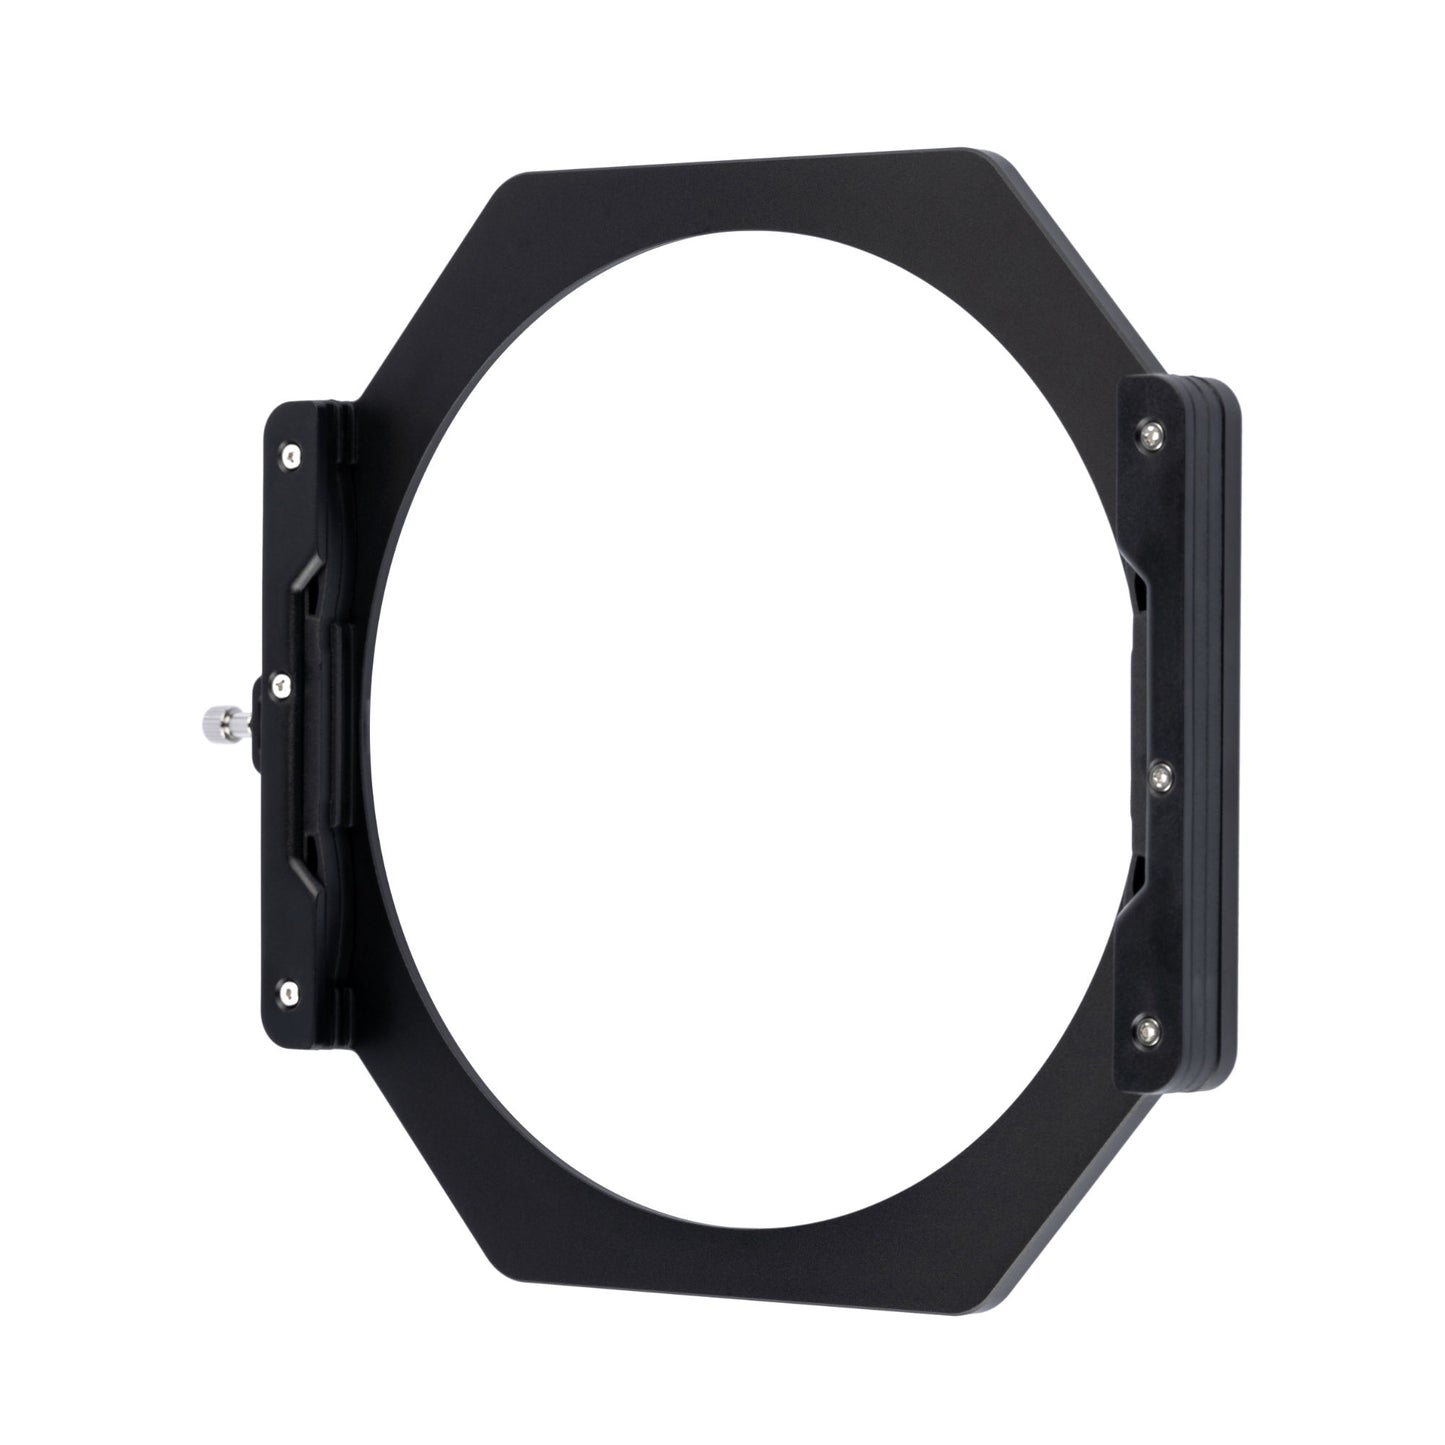 NiSi S6 150mm Filter Holder Kit with Pro CPL for Nikon Z 14-24mm f/2.8S